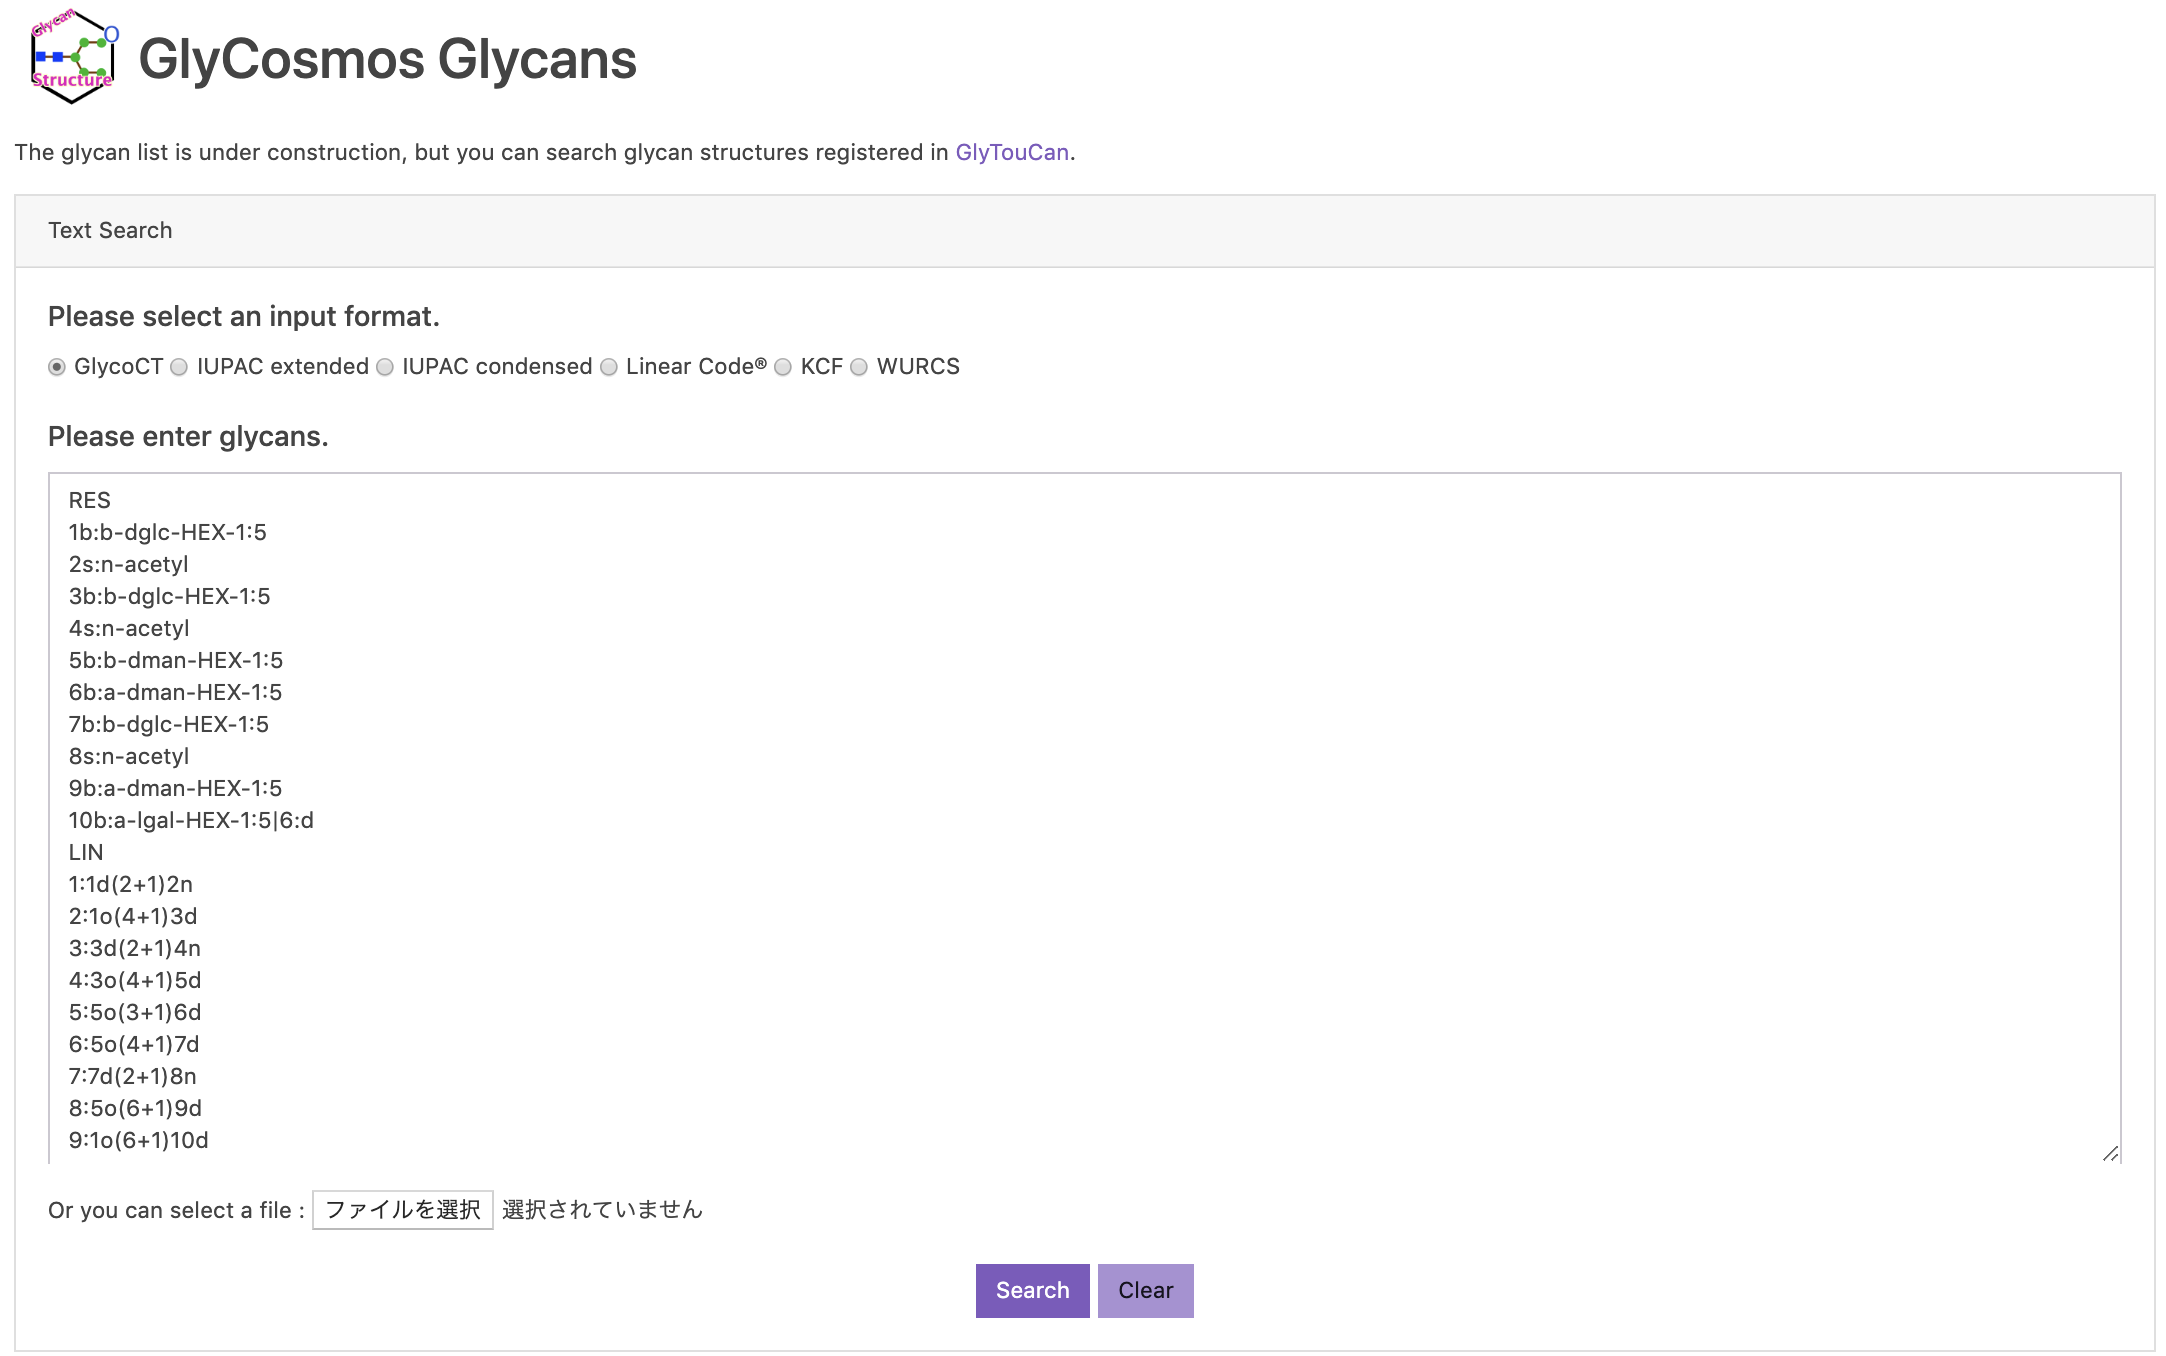 Glycosmos Text Search Interface